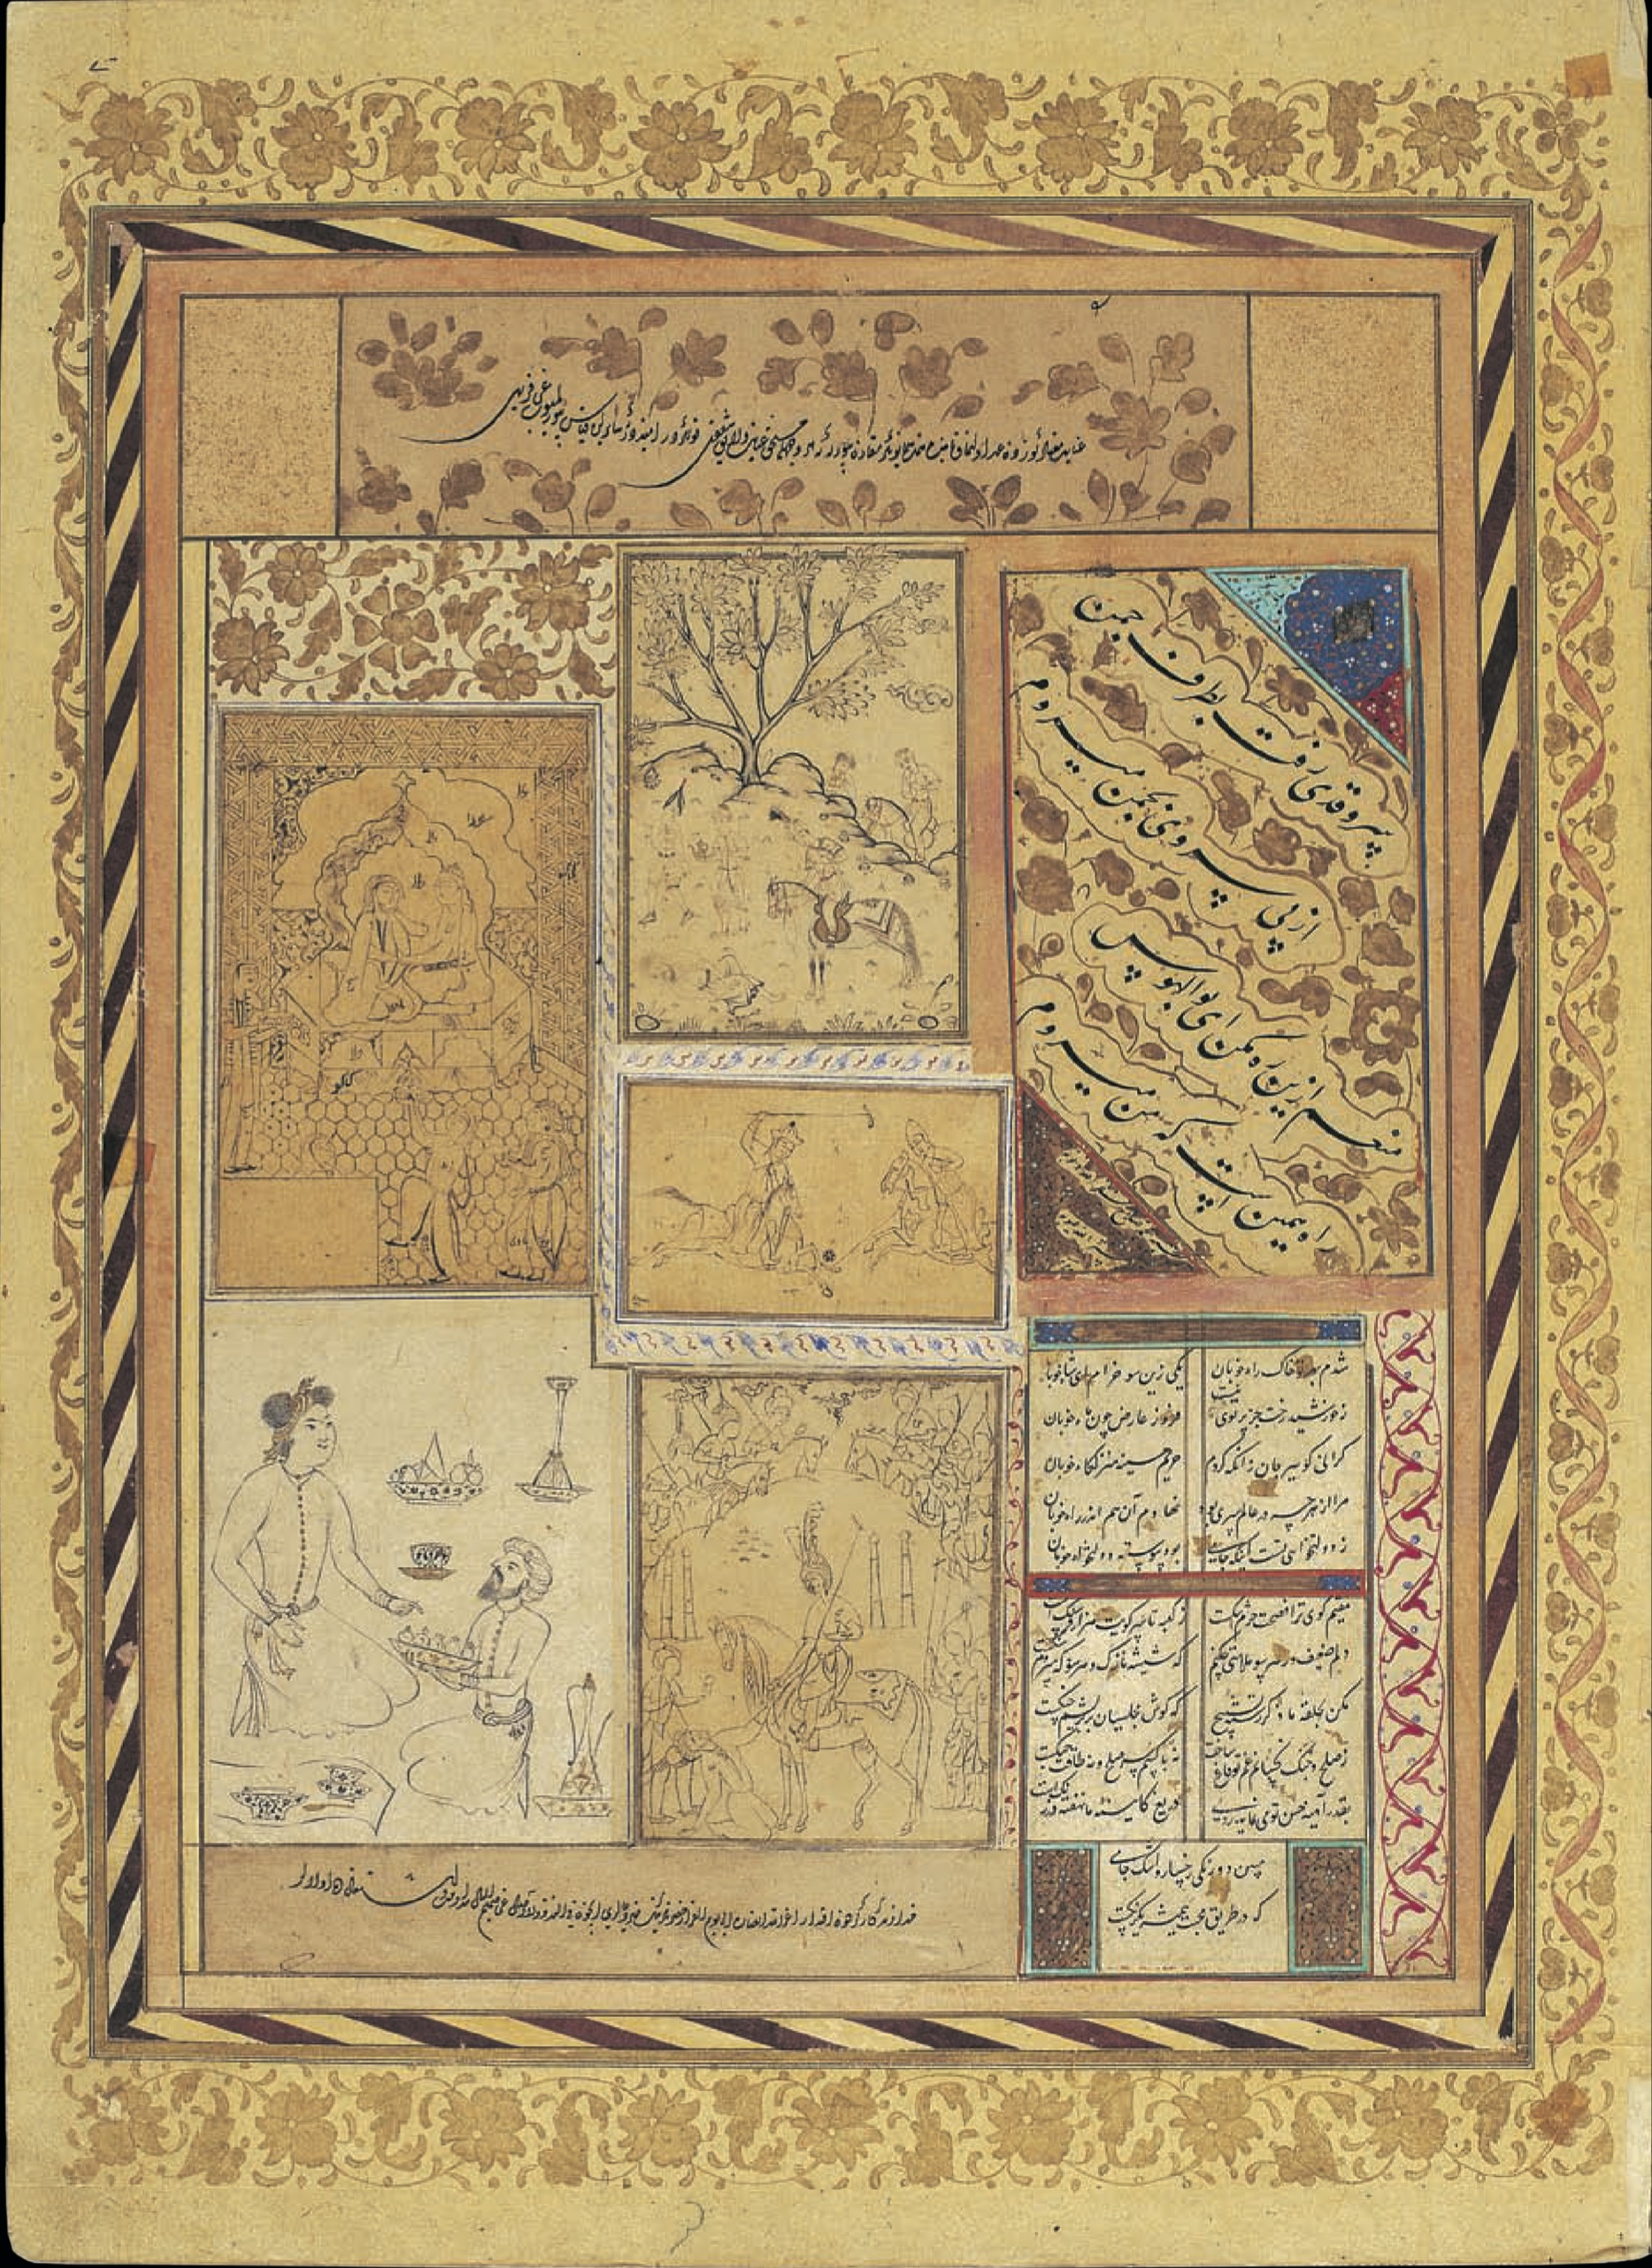 Collecting Fragments: An Arabic-Persian Translation Workshop